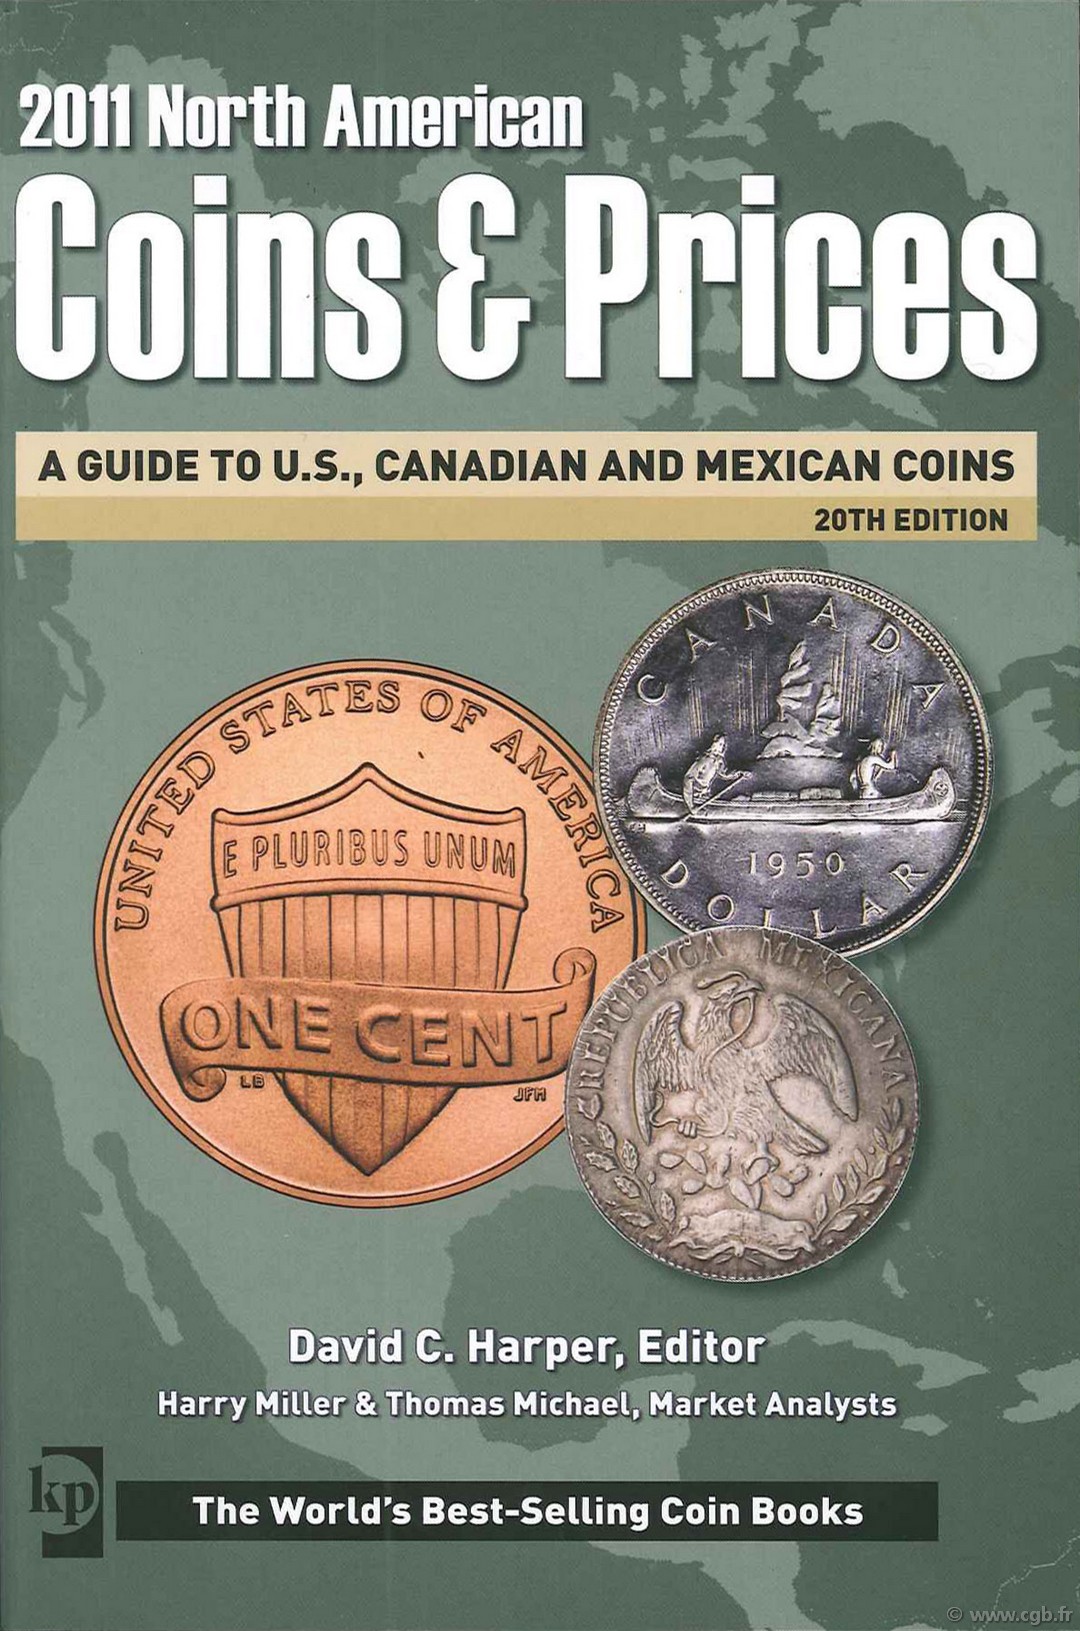 2011 North American Coins & Prices : A Guide to U. S., Canadian and Mexican Coins
 HARPER David C., MILLER Harry, MICHAEL Thomas